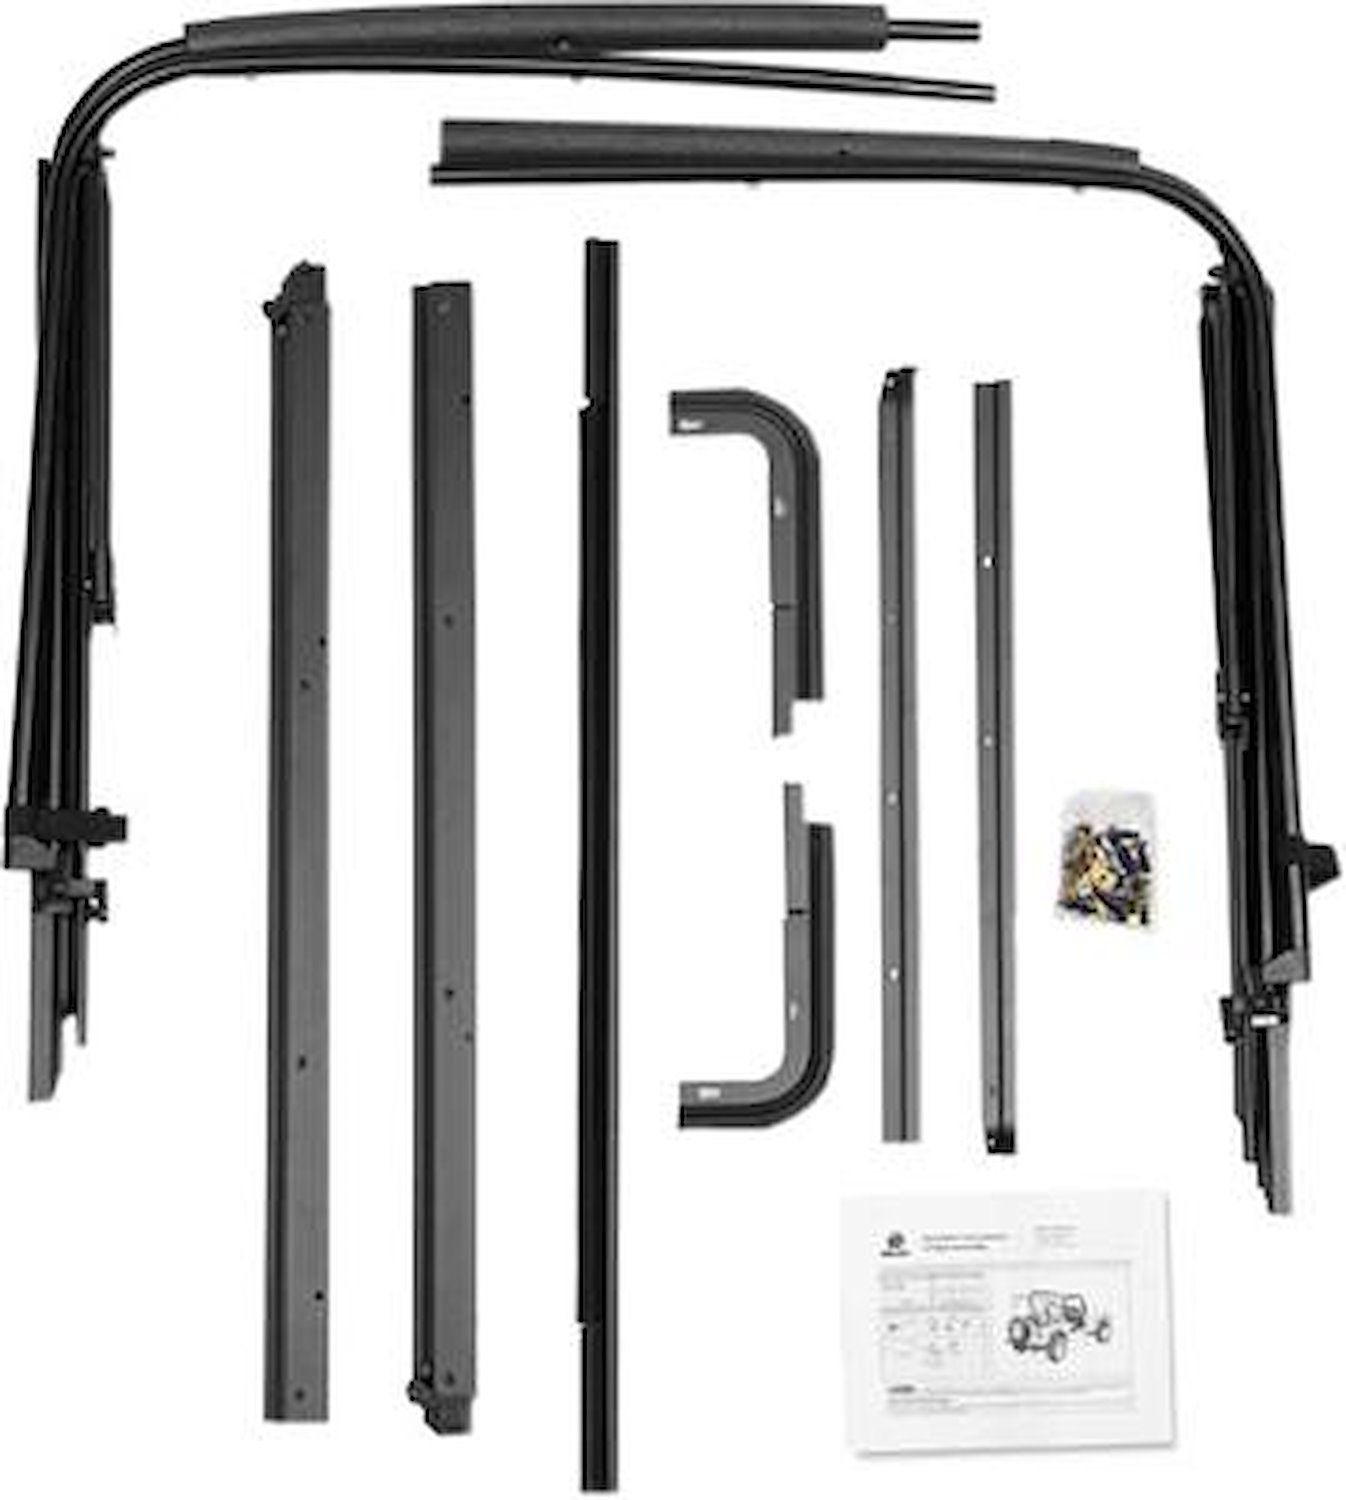 OE Style Replacement Bow And Frame Hardware Kit, Incl. Replacement Hardware/Door Surrounds/Tailgate Bar/Retainer Clips,